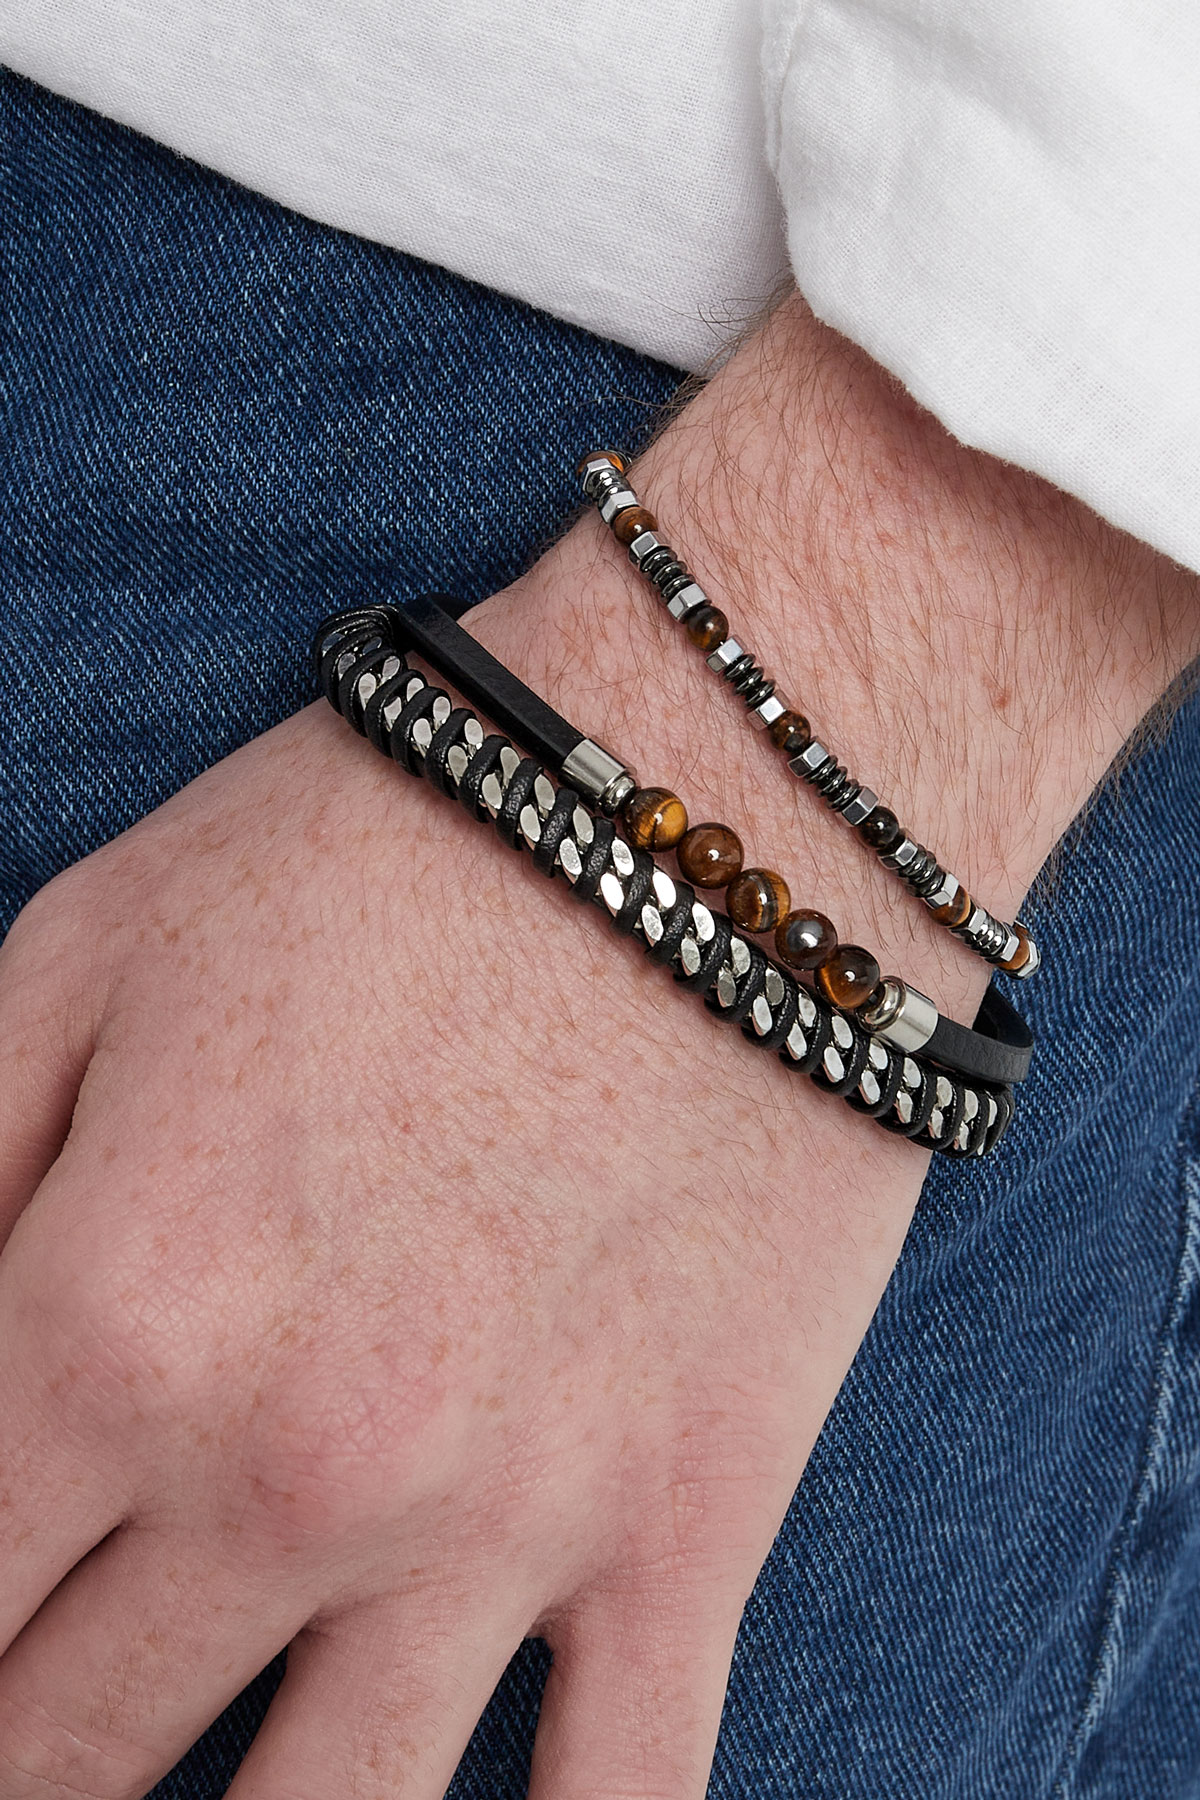 Simple men's bracelet with beads - black silver Picture2